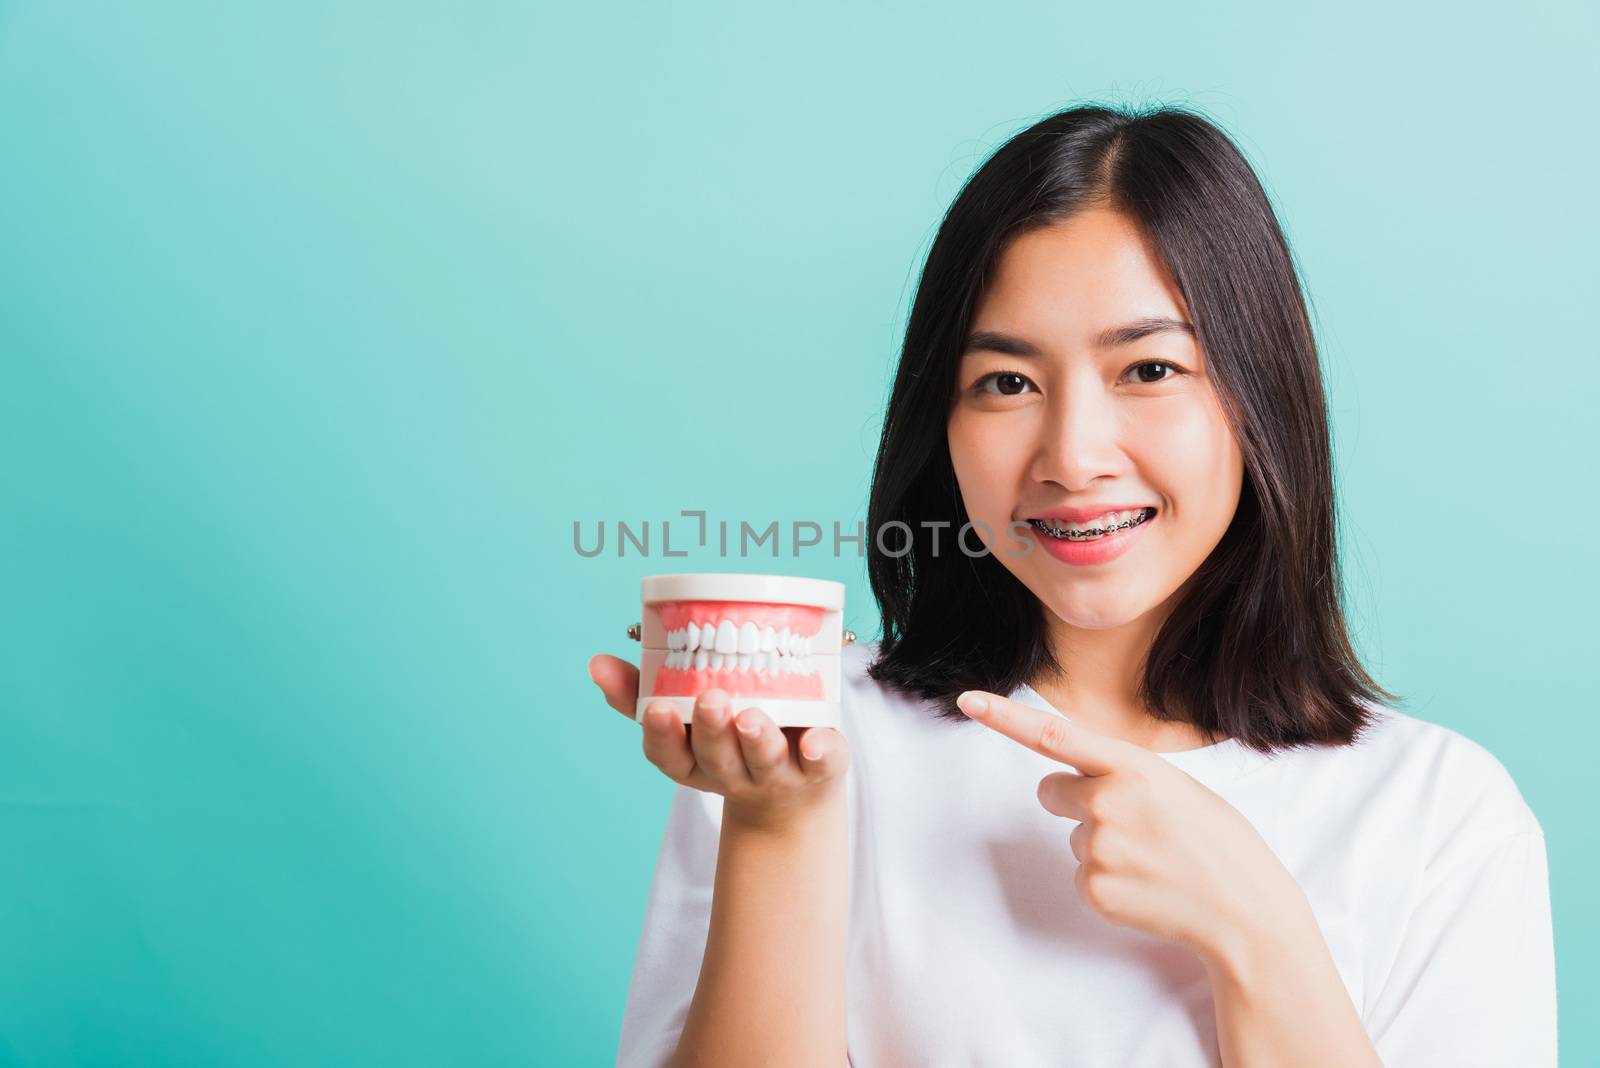 Portrait of Asian teen beautiful young woman smile have dental braces on teeth laughing she pointing medical equipment dental model teeth, isolated on a blue background, Medicine and dentistry concept